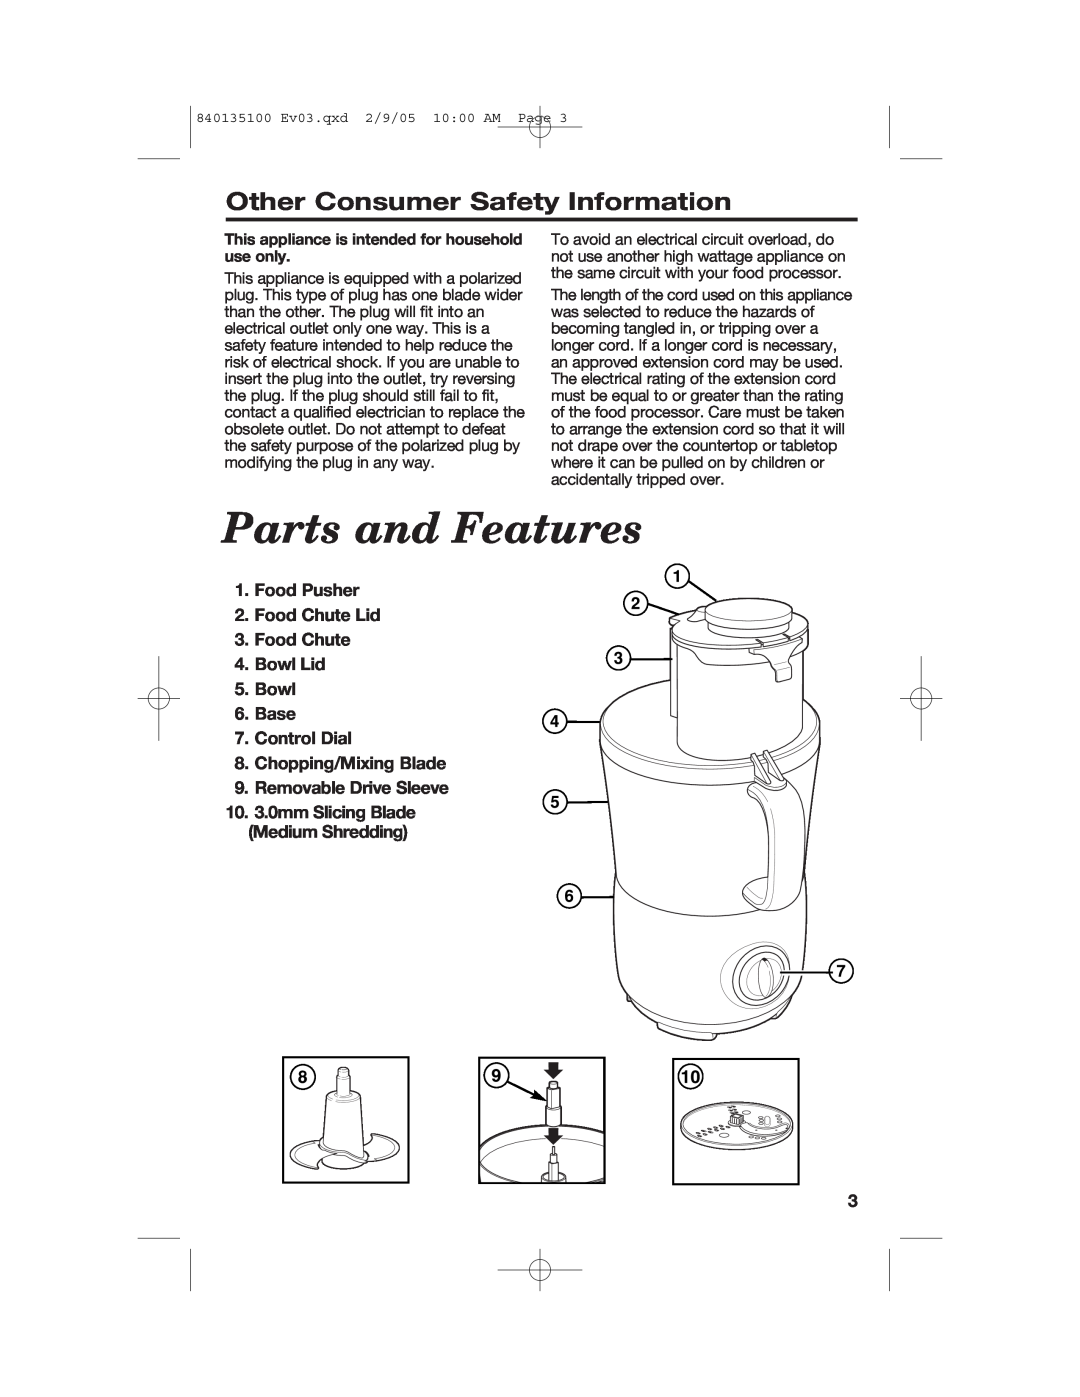 Hamilton Beach 840135100 manual Parts and Features, Other Consumer Safety Information 